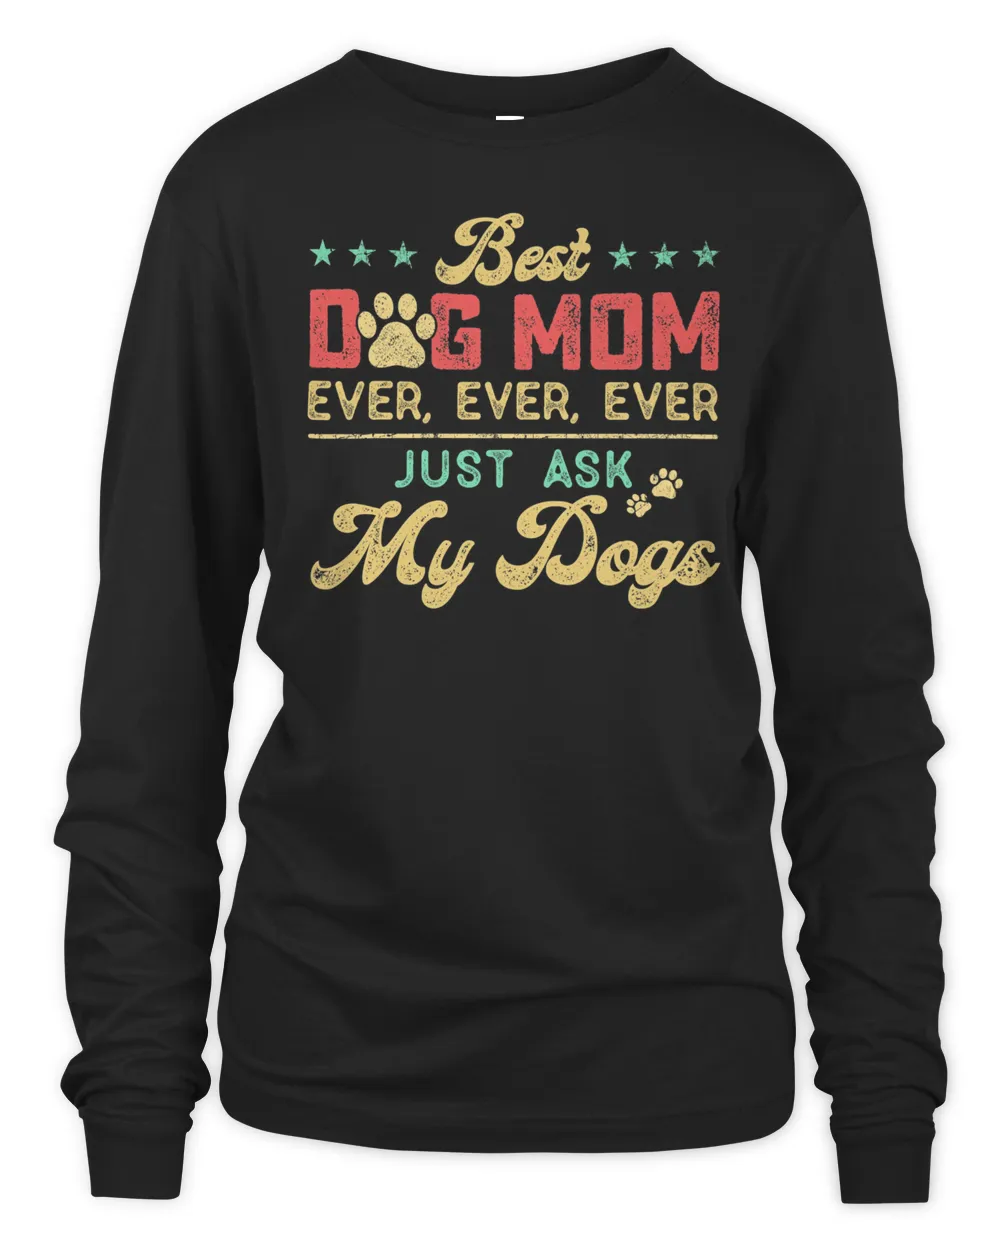 Best Dog Mom Ever Ever Ever Just Ask My Dogs Shirt